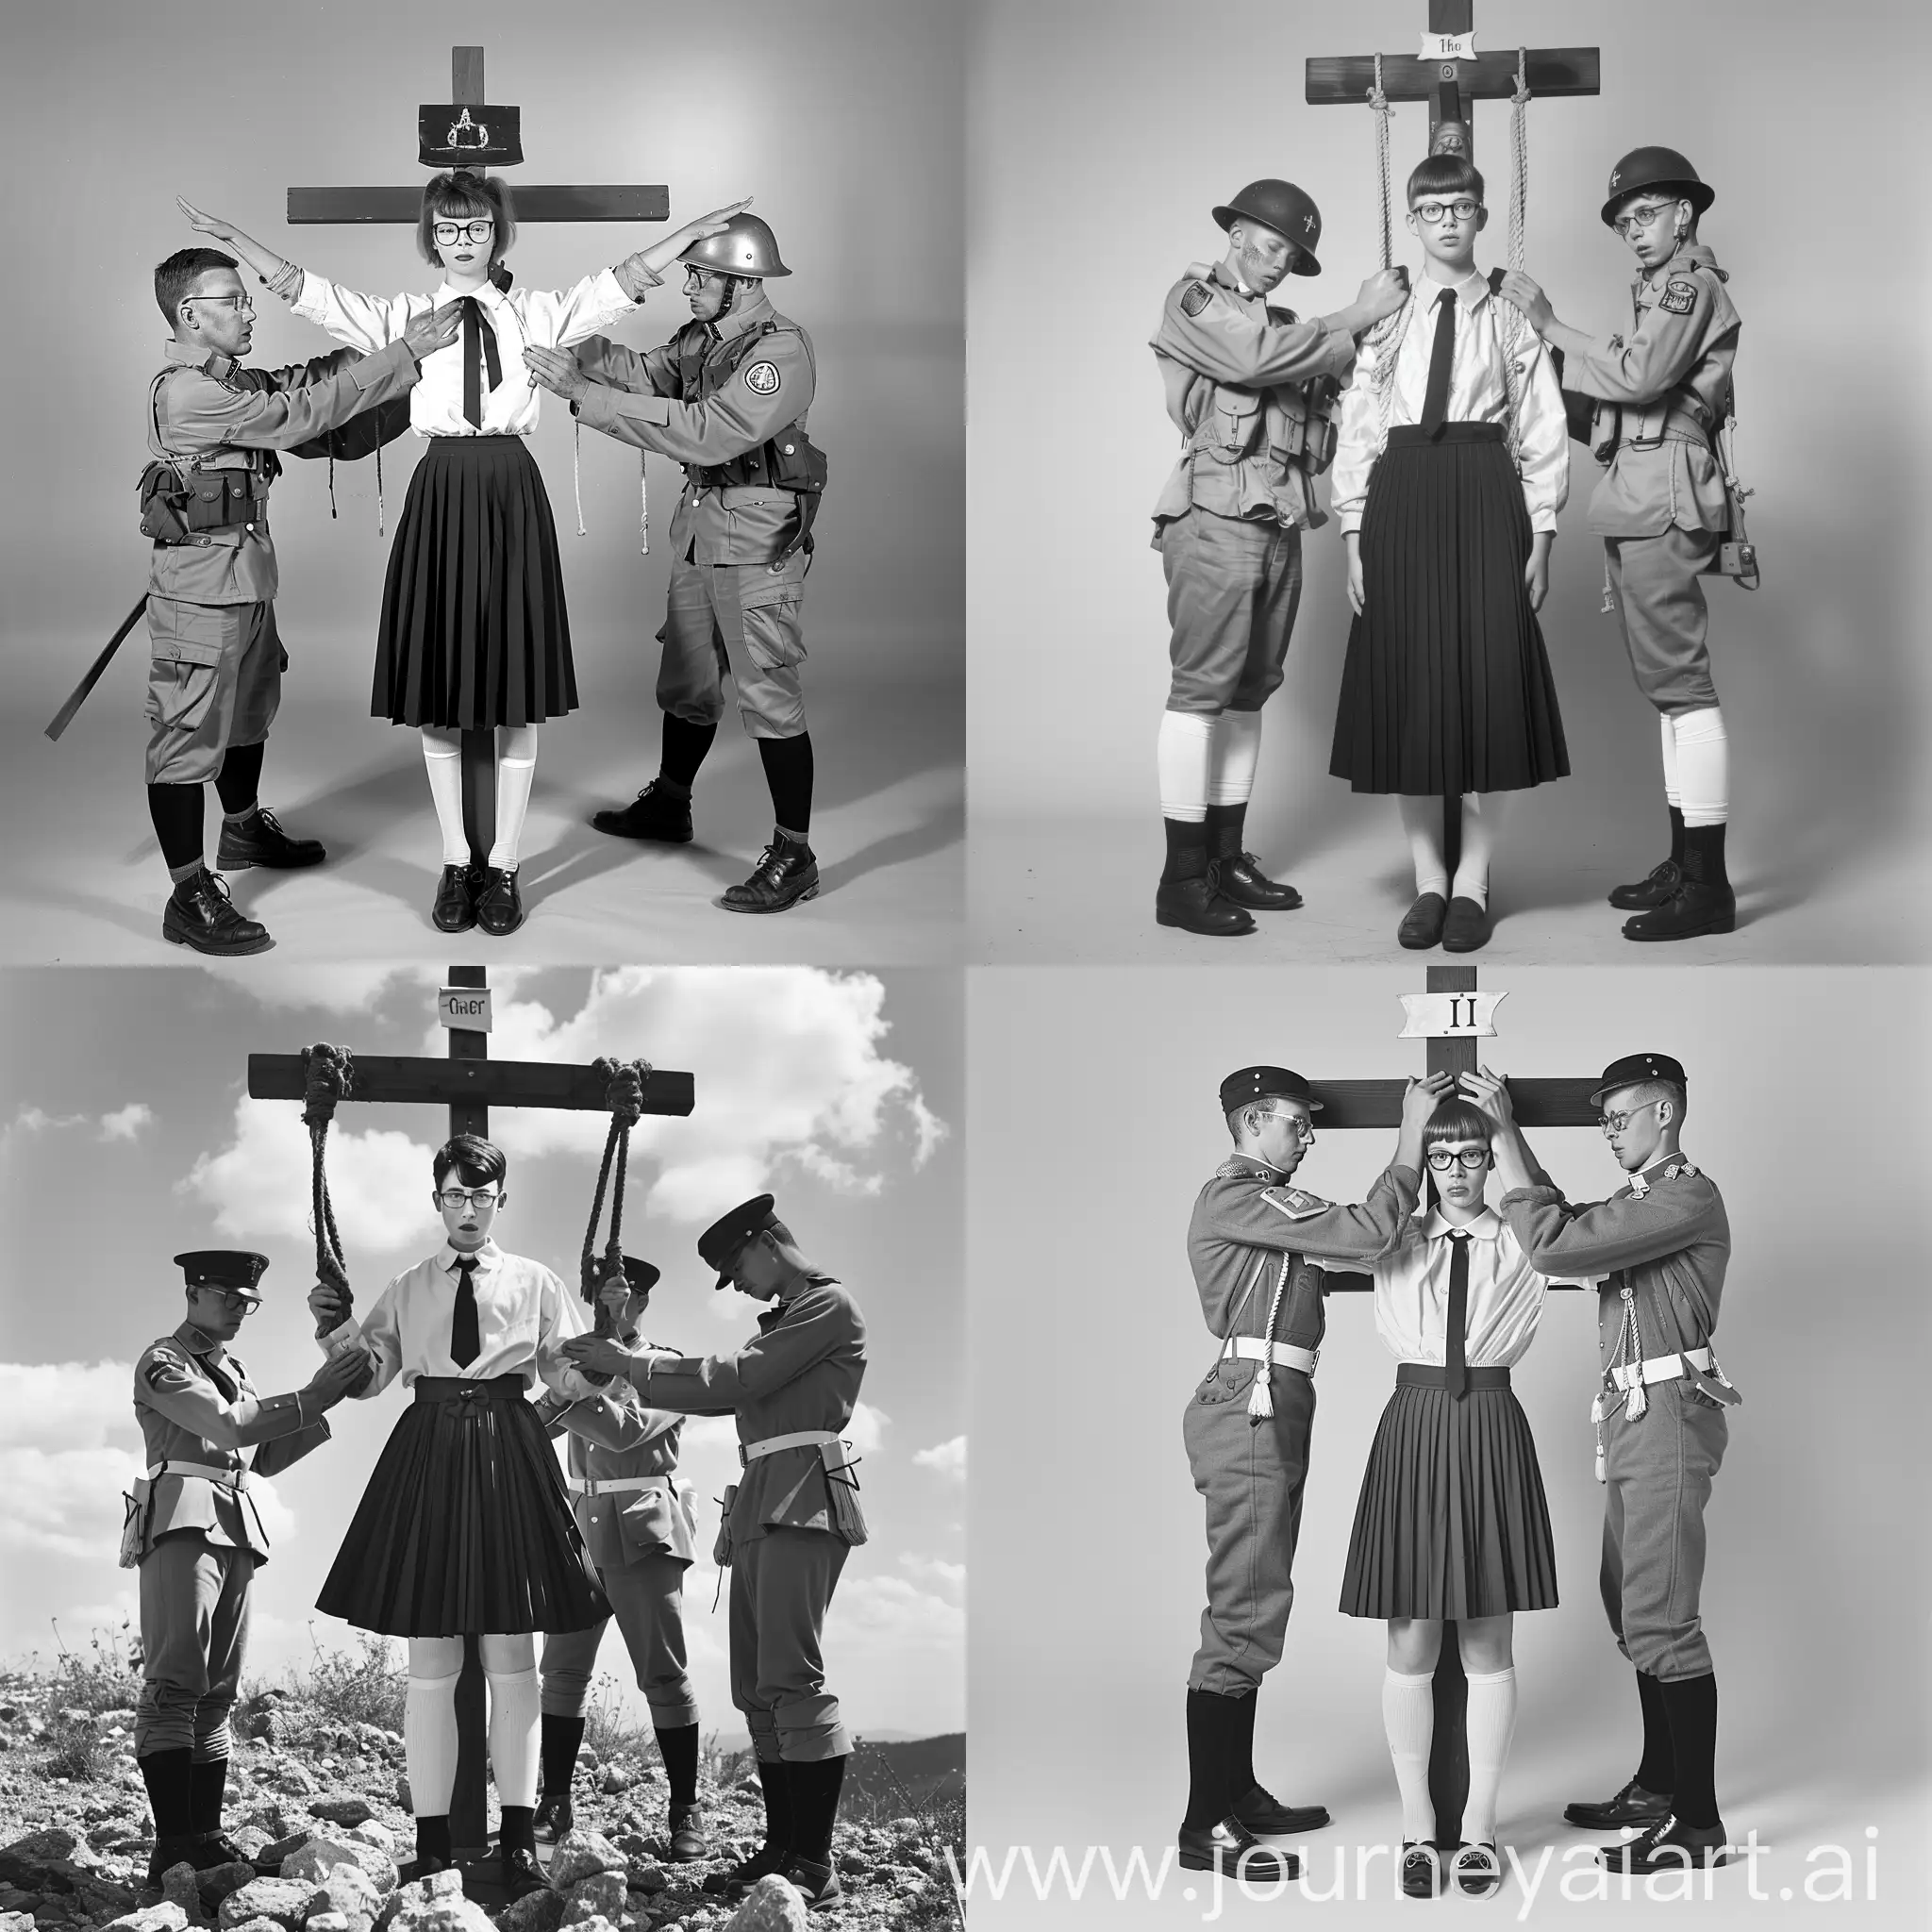 Catholic-Postulant-Crucified-by-Soldiers-Religious-Martyrdom-Scene